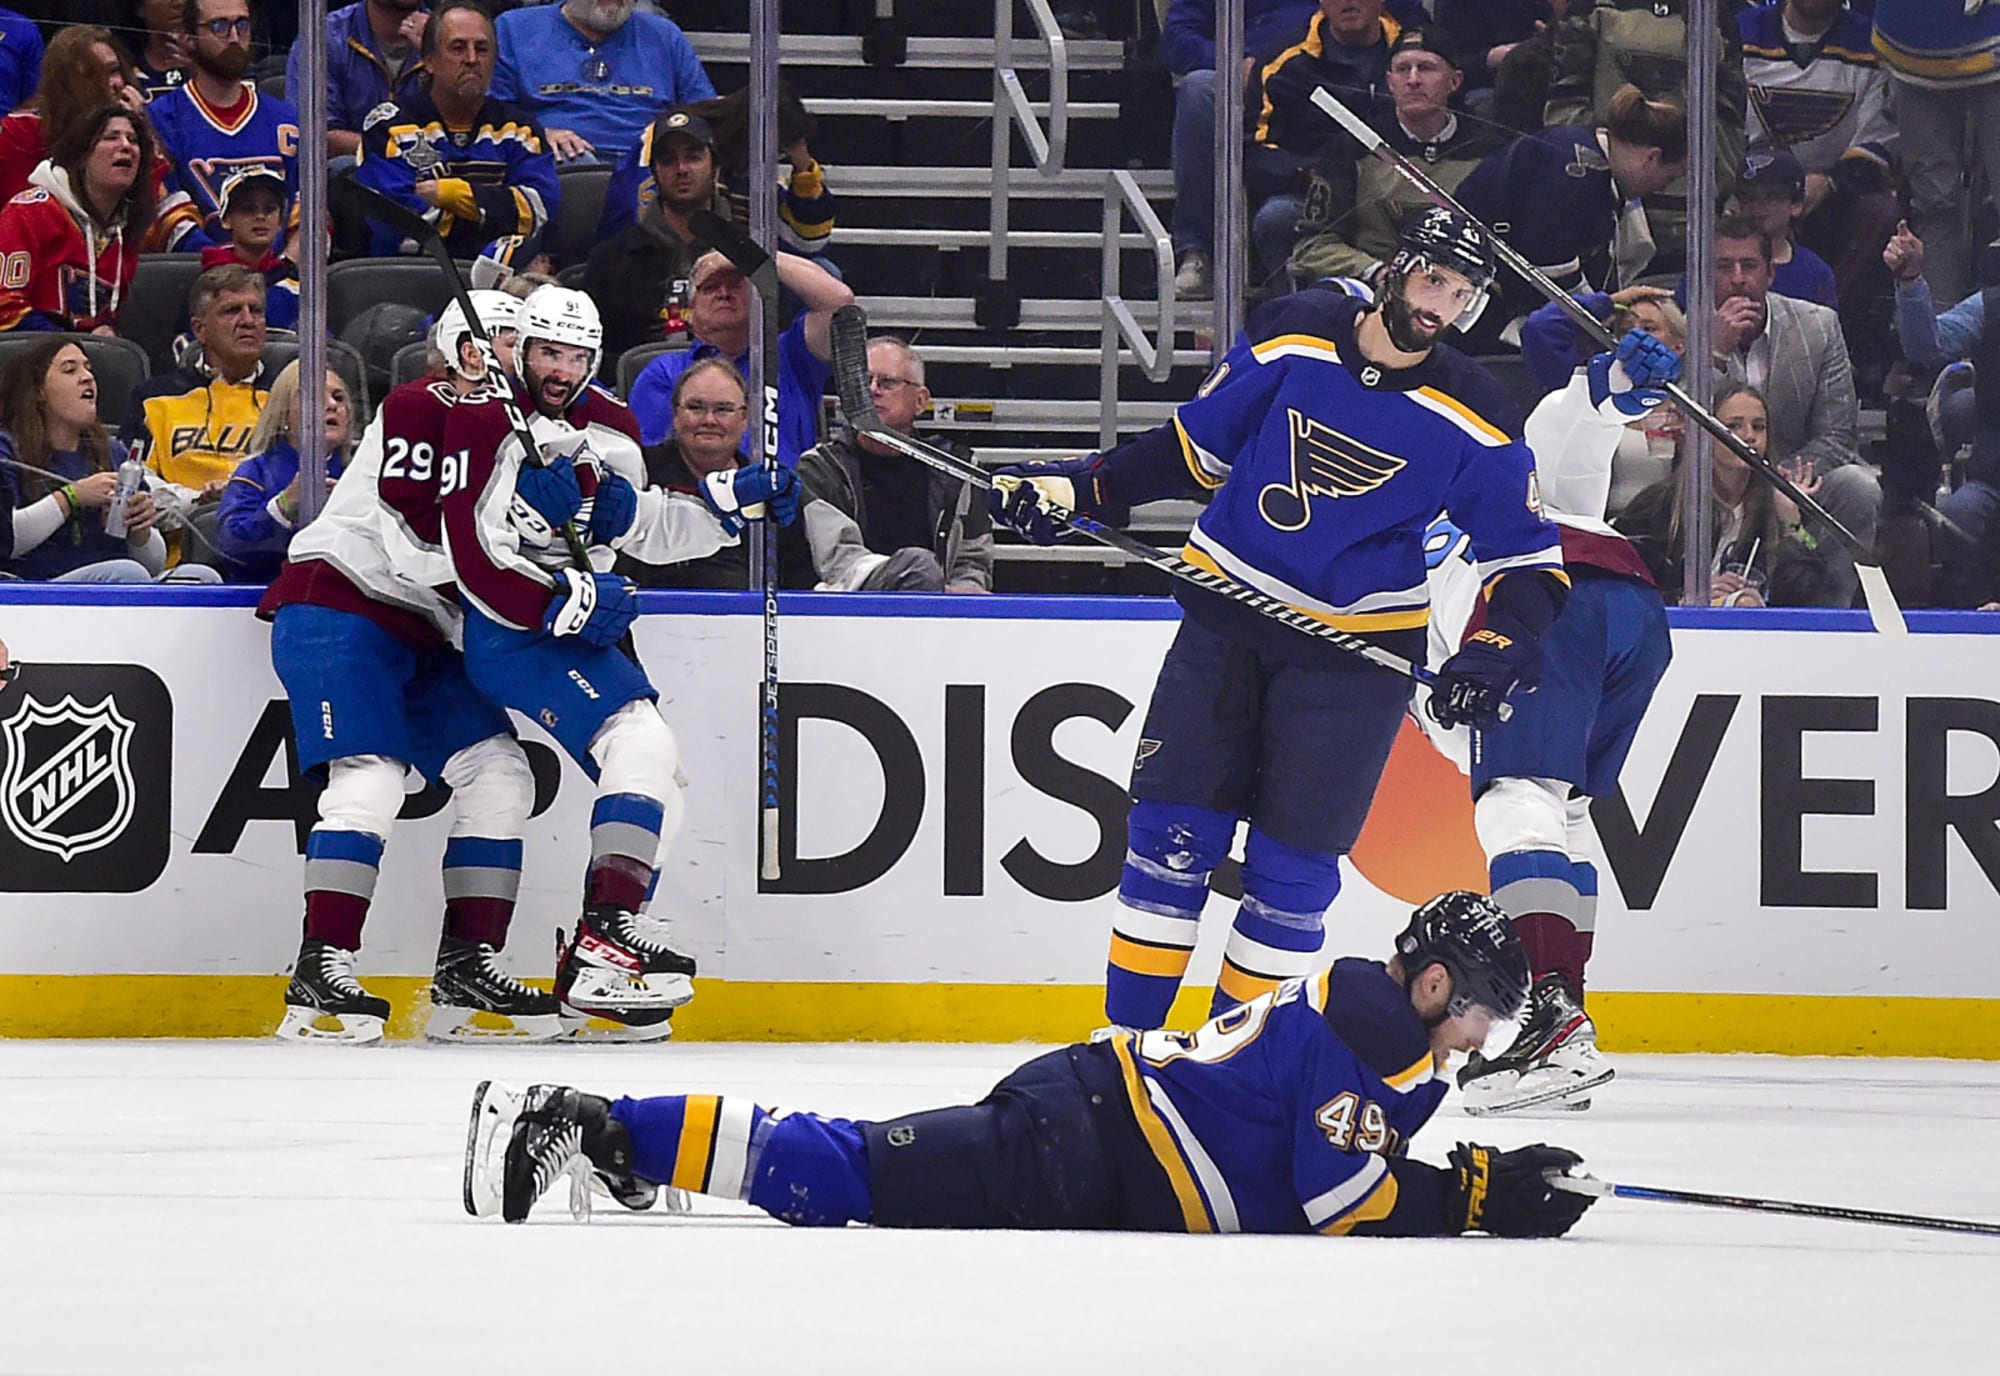 Ryan O'Reilly: We're going to have some fun and we're going to beat them  - Colorado Hockey Now